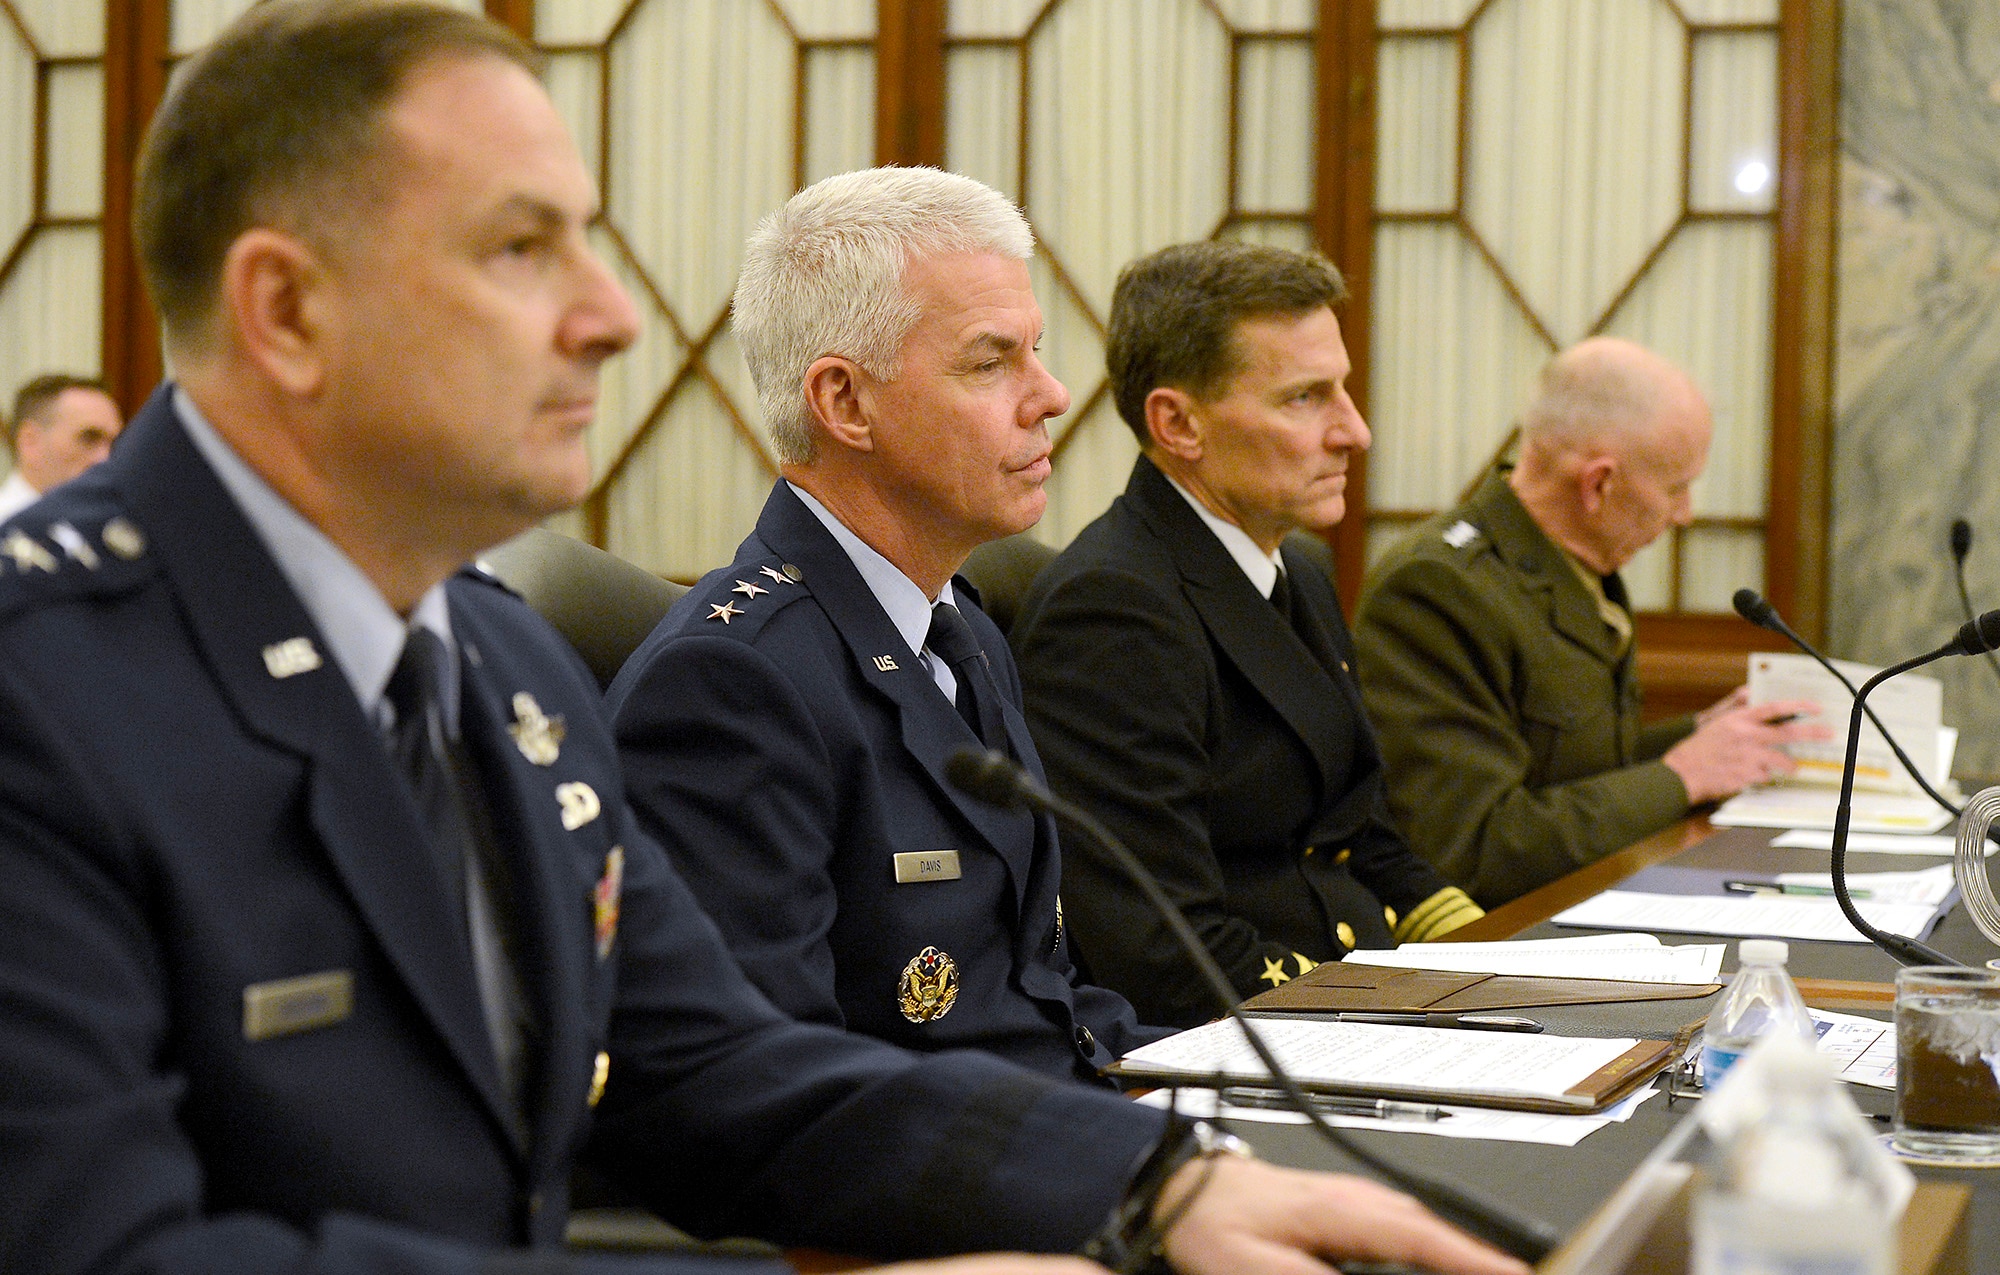 Lt. Gen. Charles R. Davis, second from left, testifies April 8, 2014, before the Senate Subcommittee on Air and Land in Washington, D.C.  Witnesses from other services at the hearing included Lt. Gen. Christopher C. Bogden, U.S. Air Force Program Executive officer, F-35 Lightning II Joint Program Office; Vice Adm. Paul A. Grosklags, Principal Military Deputy to the Assistant Secretary of the Navy for Research, Development and Acquisition; and Lt. Gen. Robert E. Schmidle Jr., Deputy Commandant of the Marine Corps for Aviation. Davis is the Military Deputy to the Assistant Secretary of the Air Force for Acquisition. (U.S. Air Force photo/Scott M. Ash)